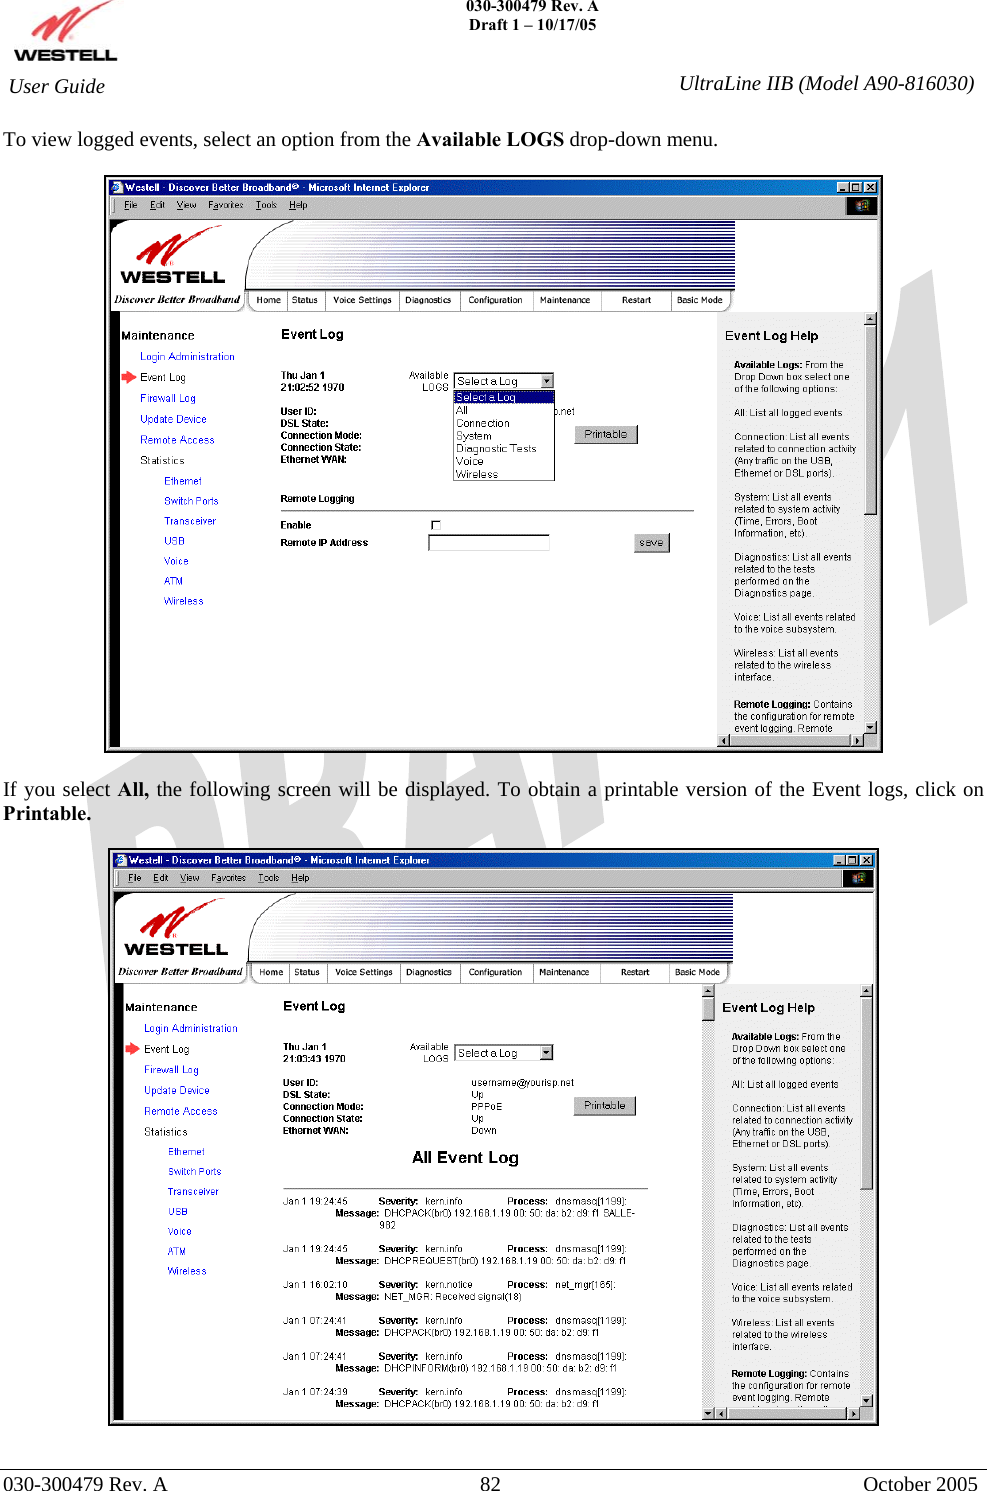    030-300479 Rev. A Draft 1 – 10/17/05   030-300479 Rev. A  82  October 2005  User Guide  UltraLine IIB (Model A90-816030)To view logged events, select an option from the Available LOGS drop-down menu.    If you select All, the following screen will be displayed. To obtain a printable version of the Event logs, click on Printable.    